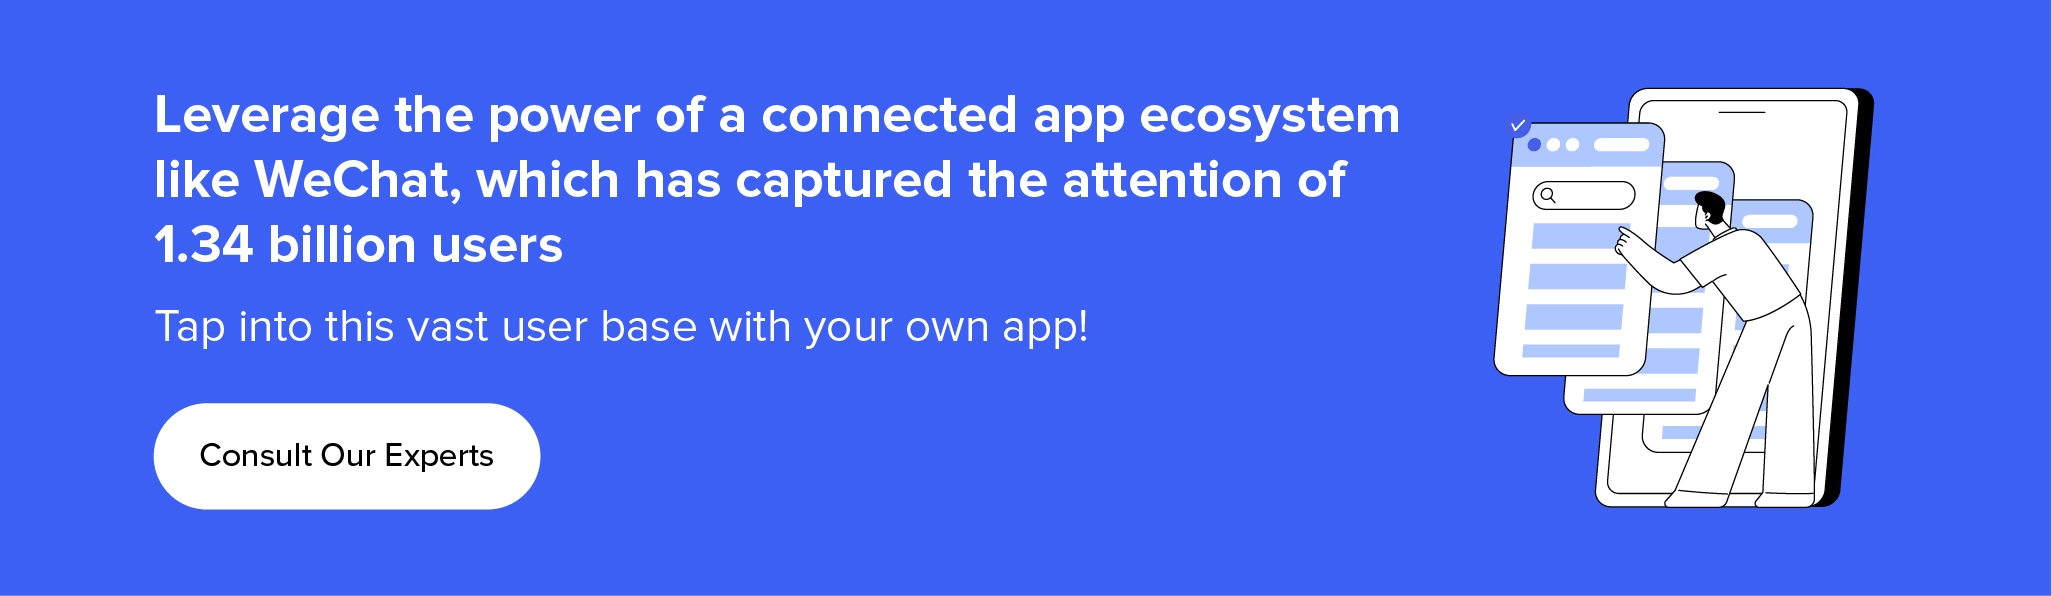 Partner wit us to develop an app similar to WeChat